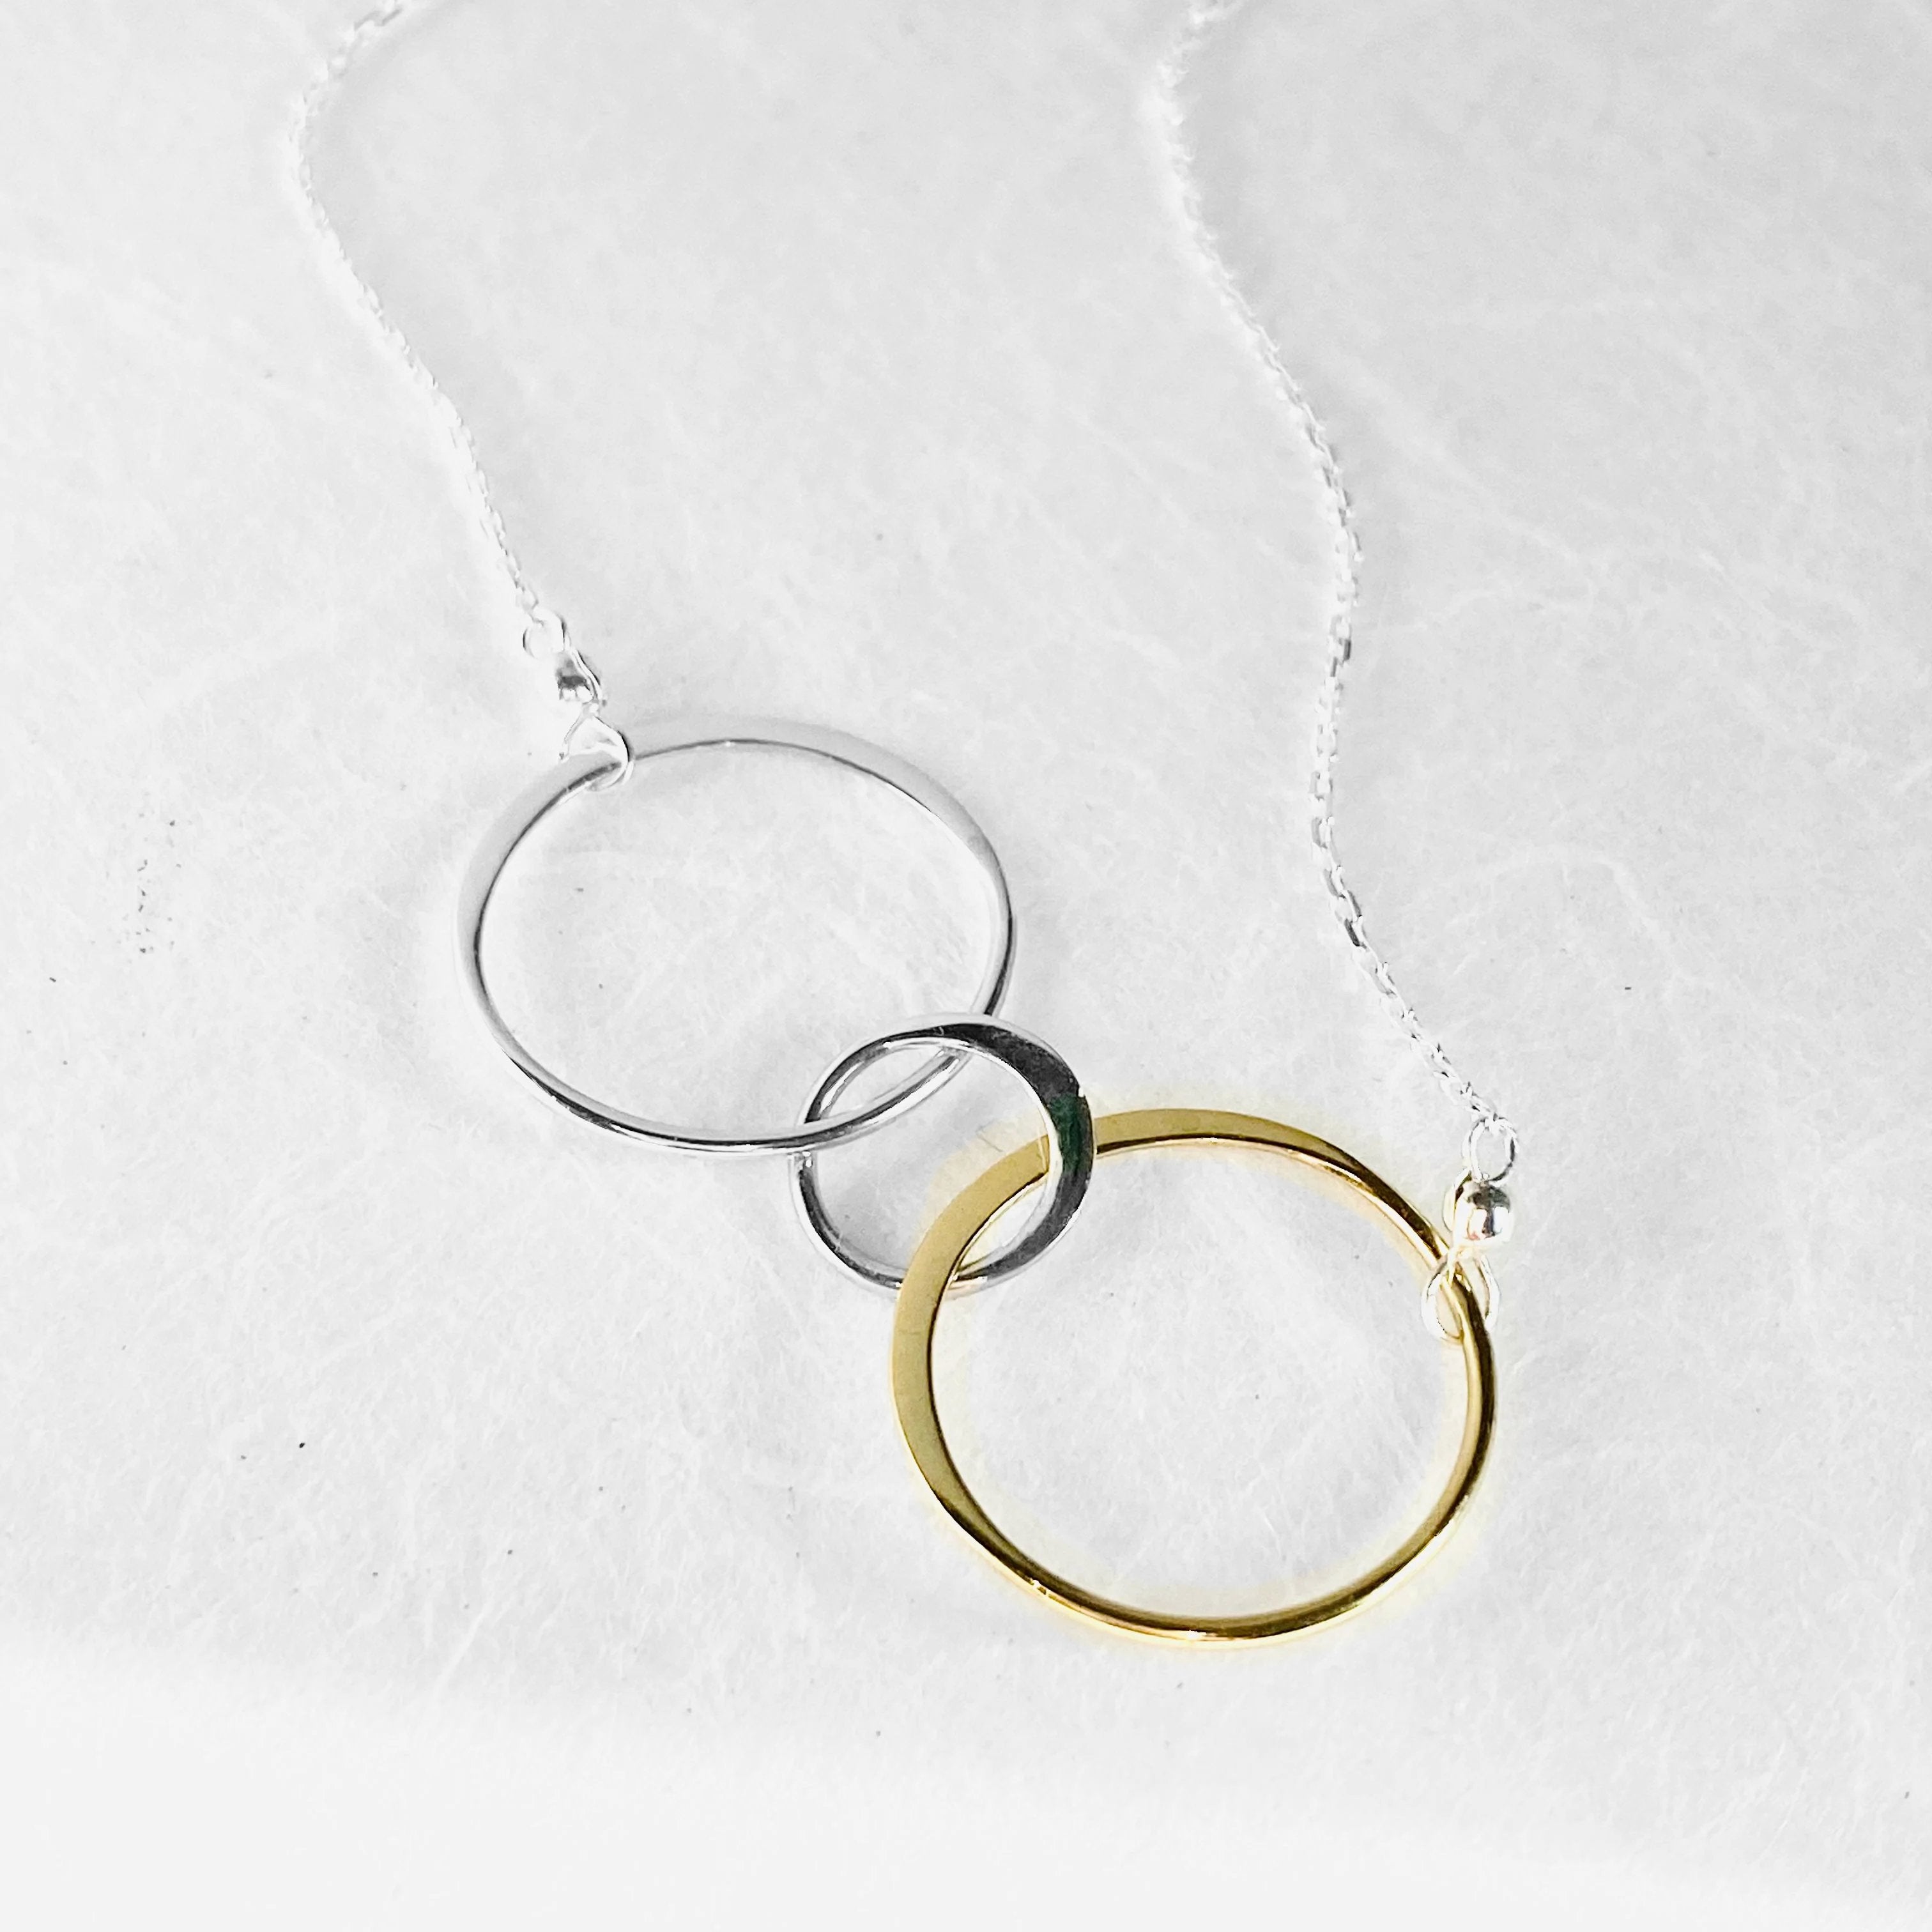 Uni-T, Circle Necklace, Infinity Necklace, Silver Necklace Janine Gerade